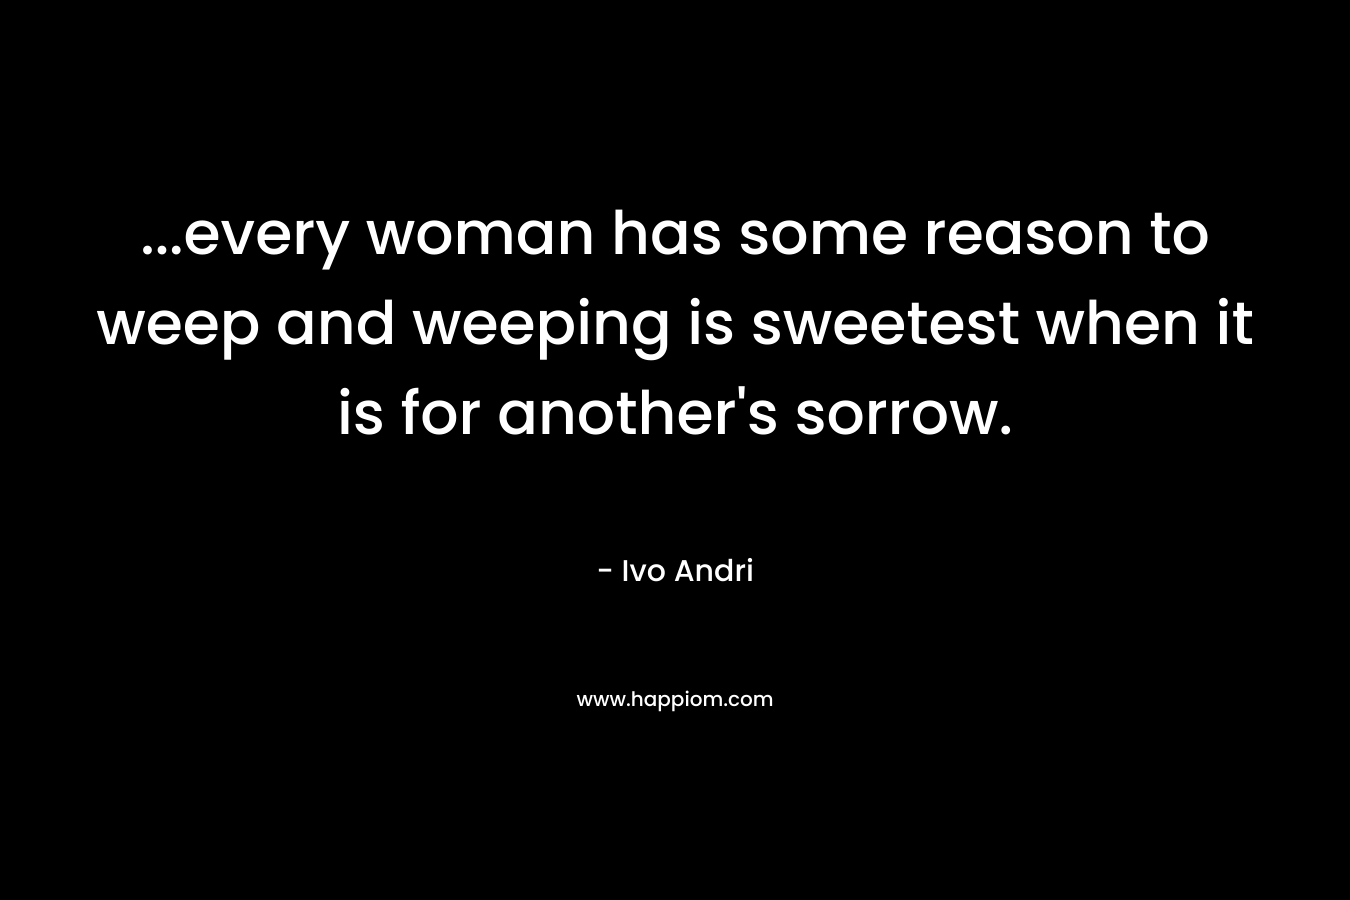 …every woman has some reason to weep and weeping is sweetest when it is for another’s sorrow. – Ivo Andri